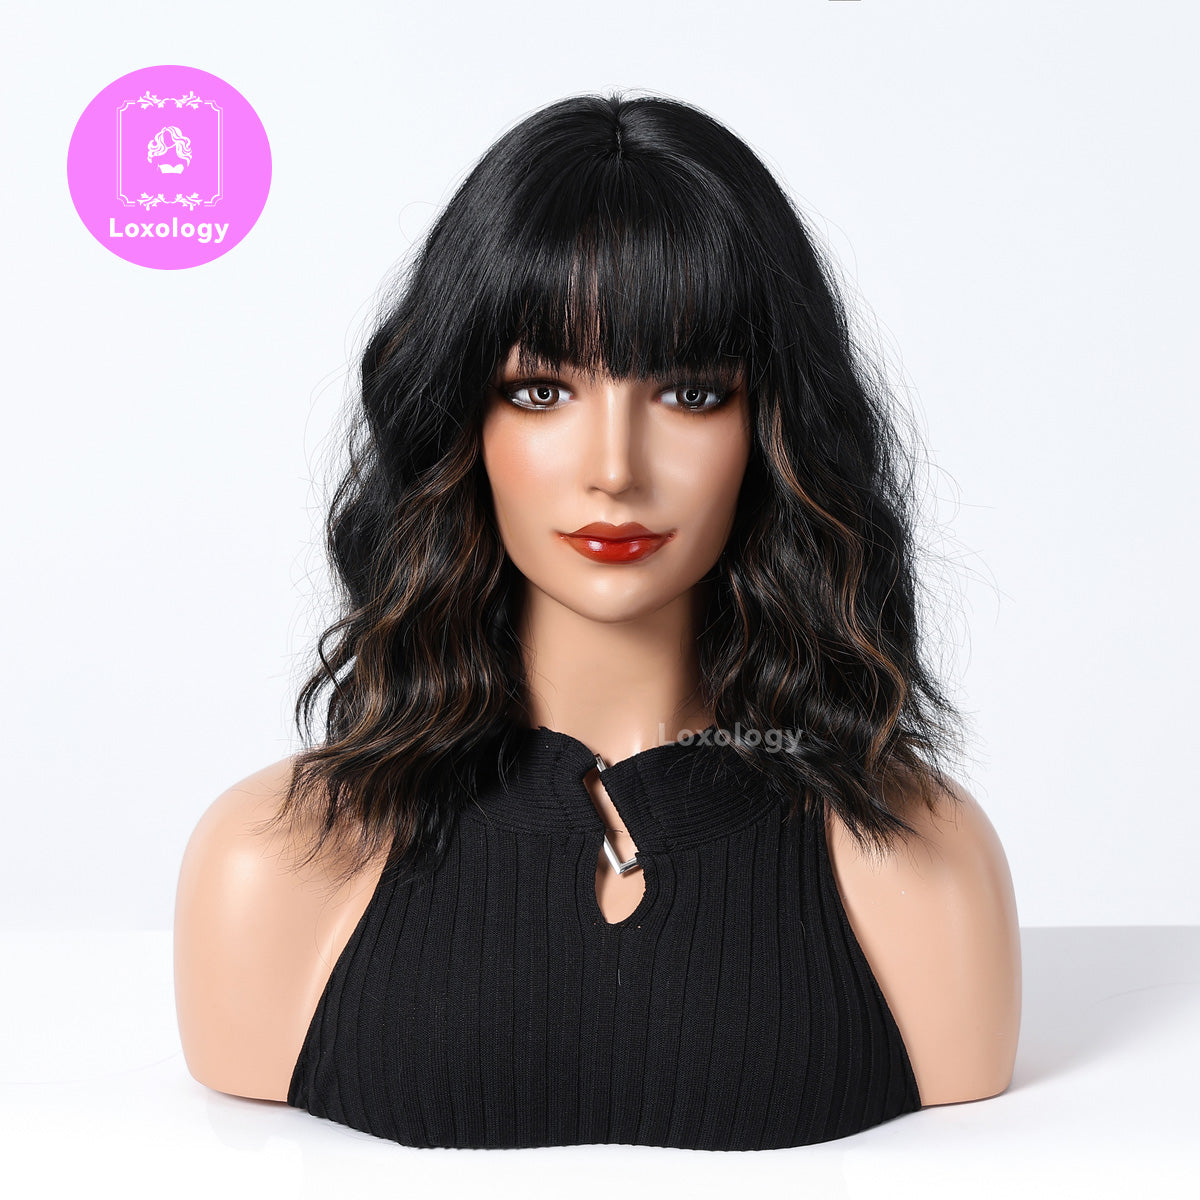 【TBeatrix】Loxology | 14 inches Short Natural wave Short Fashion Wigs Synthetic Wigs